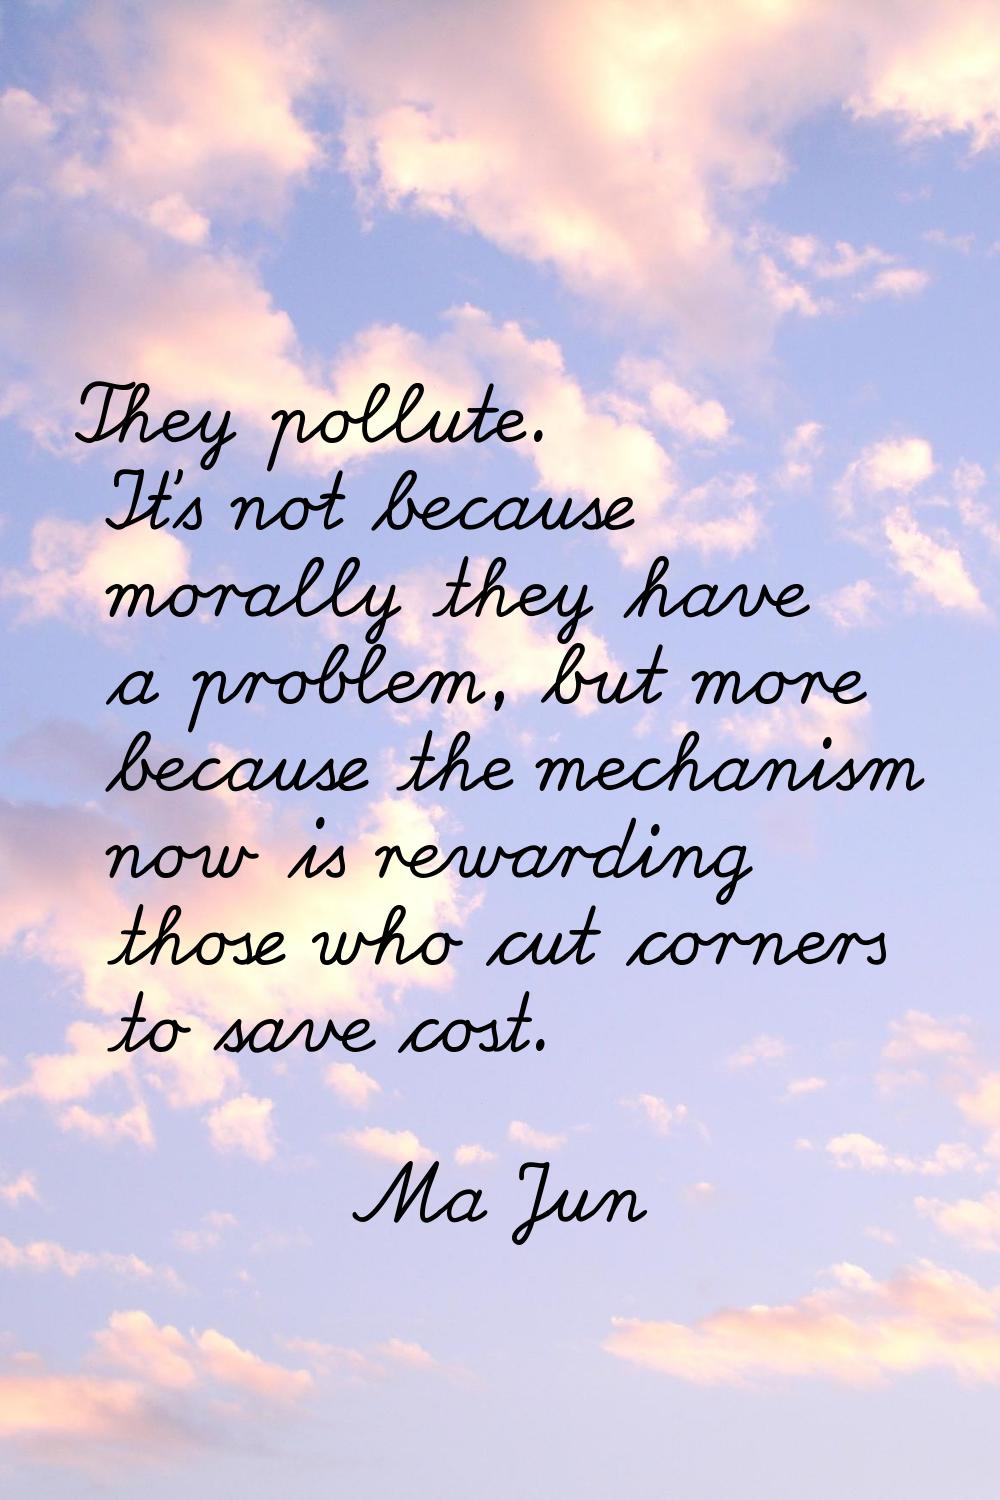 They pollute. It's not because morally they have a problem, but more because the mechanism now is r